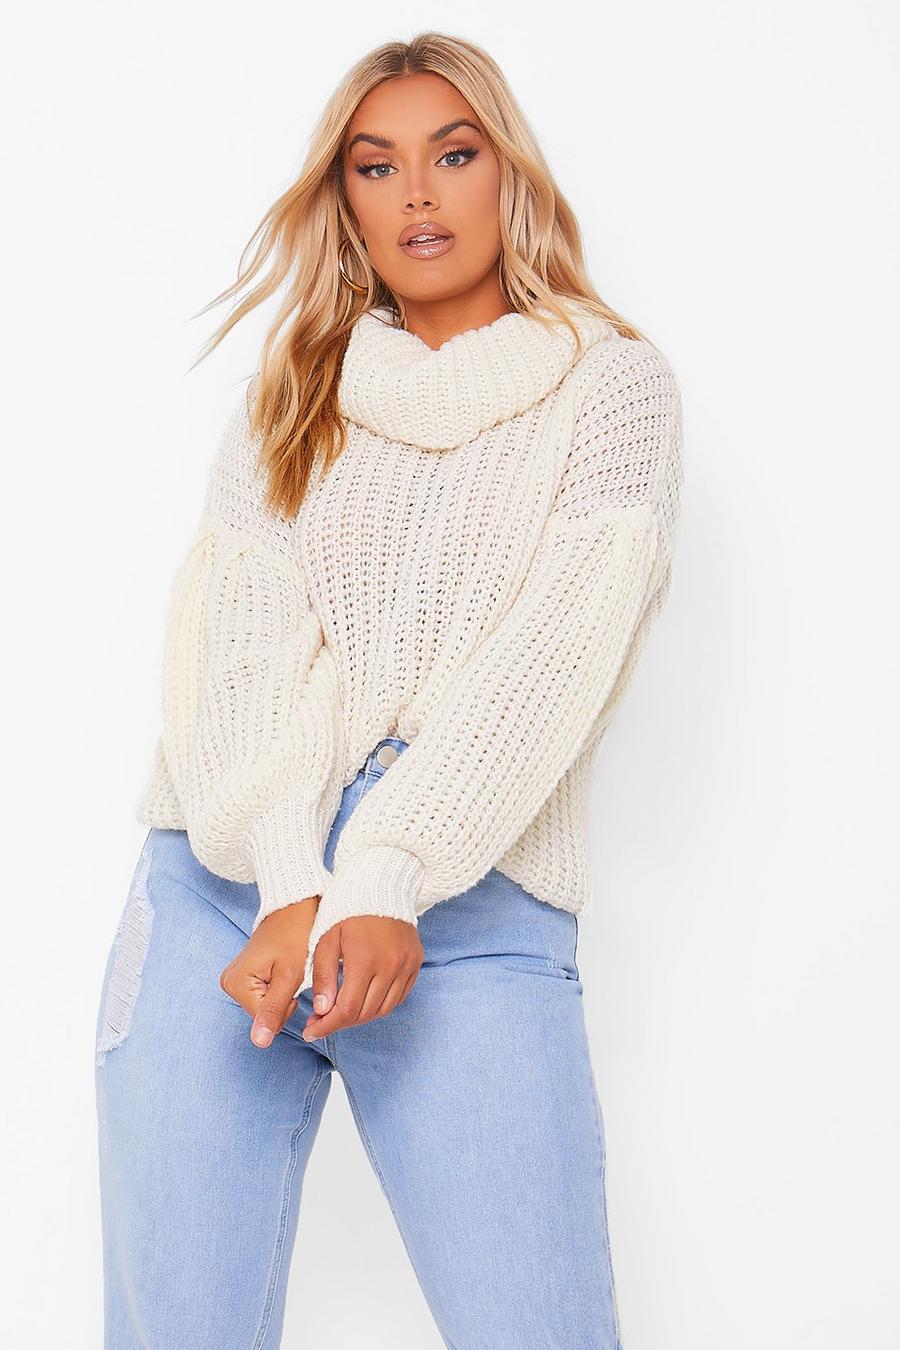 Ecru Plus Supersoft Oversized Cowl Neck Sweater image number 1